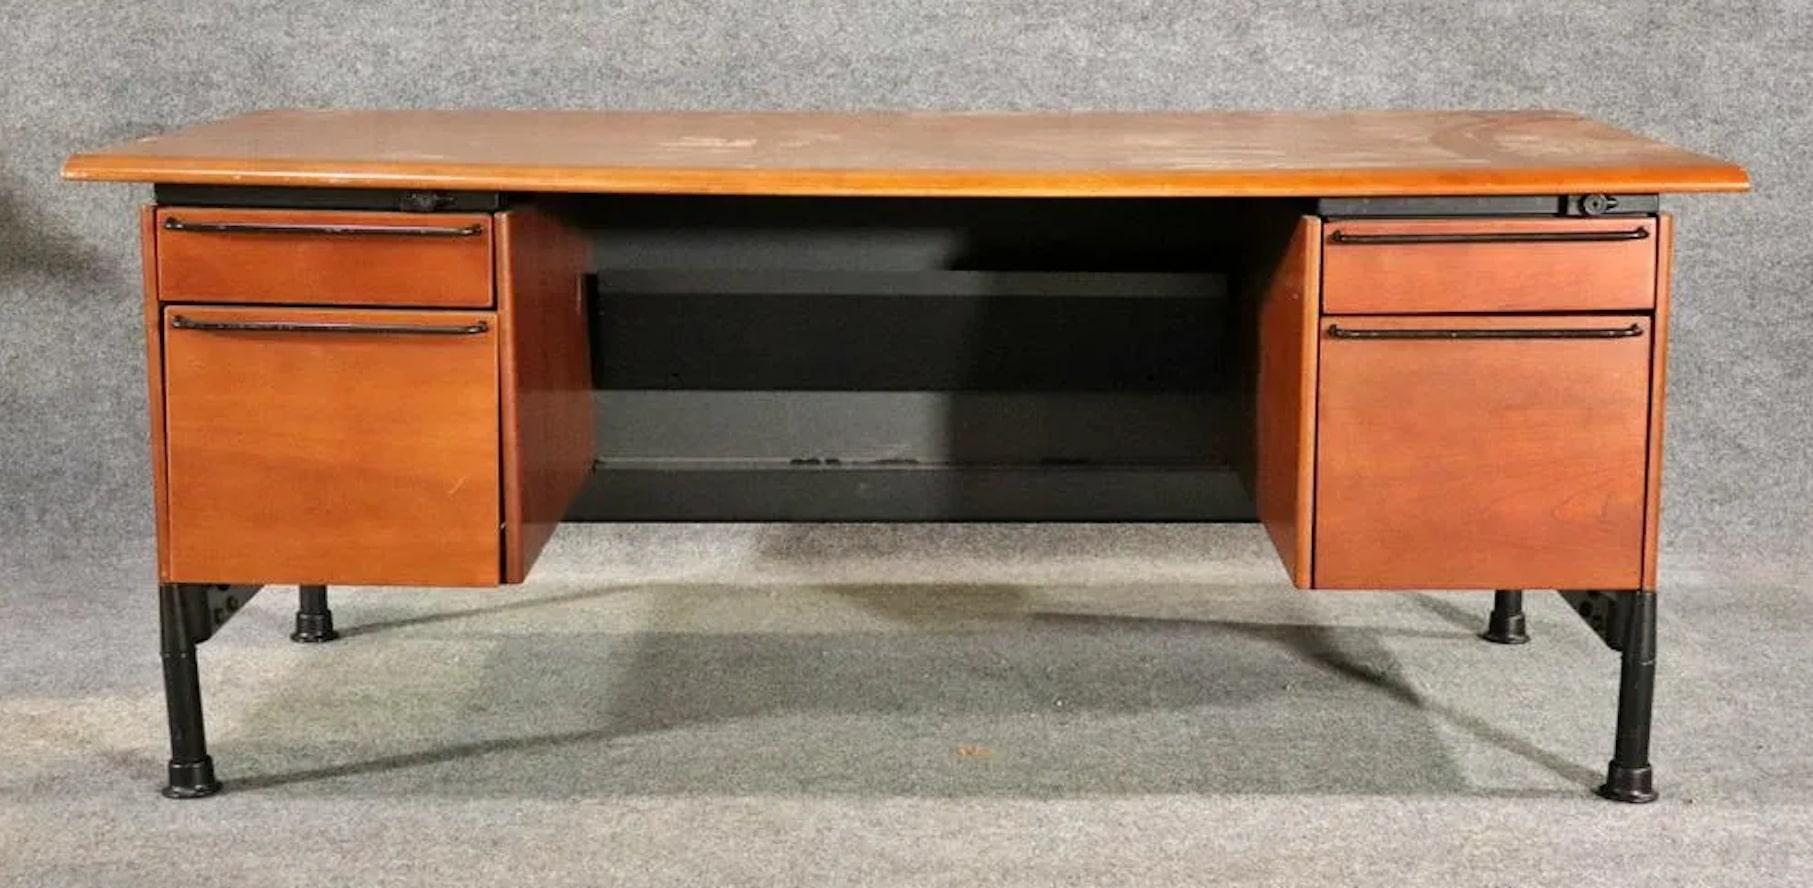 Modern office desk by Herman Miller. Made in 1993 while retaining the mid-century modern style. Large wood top with metal hardware.
Please confirm location NY or NJ.